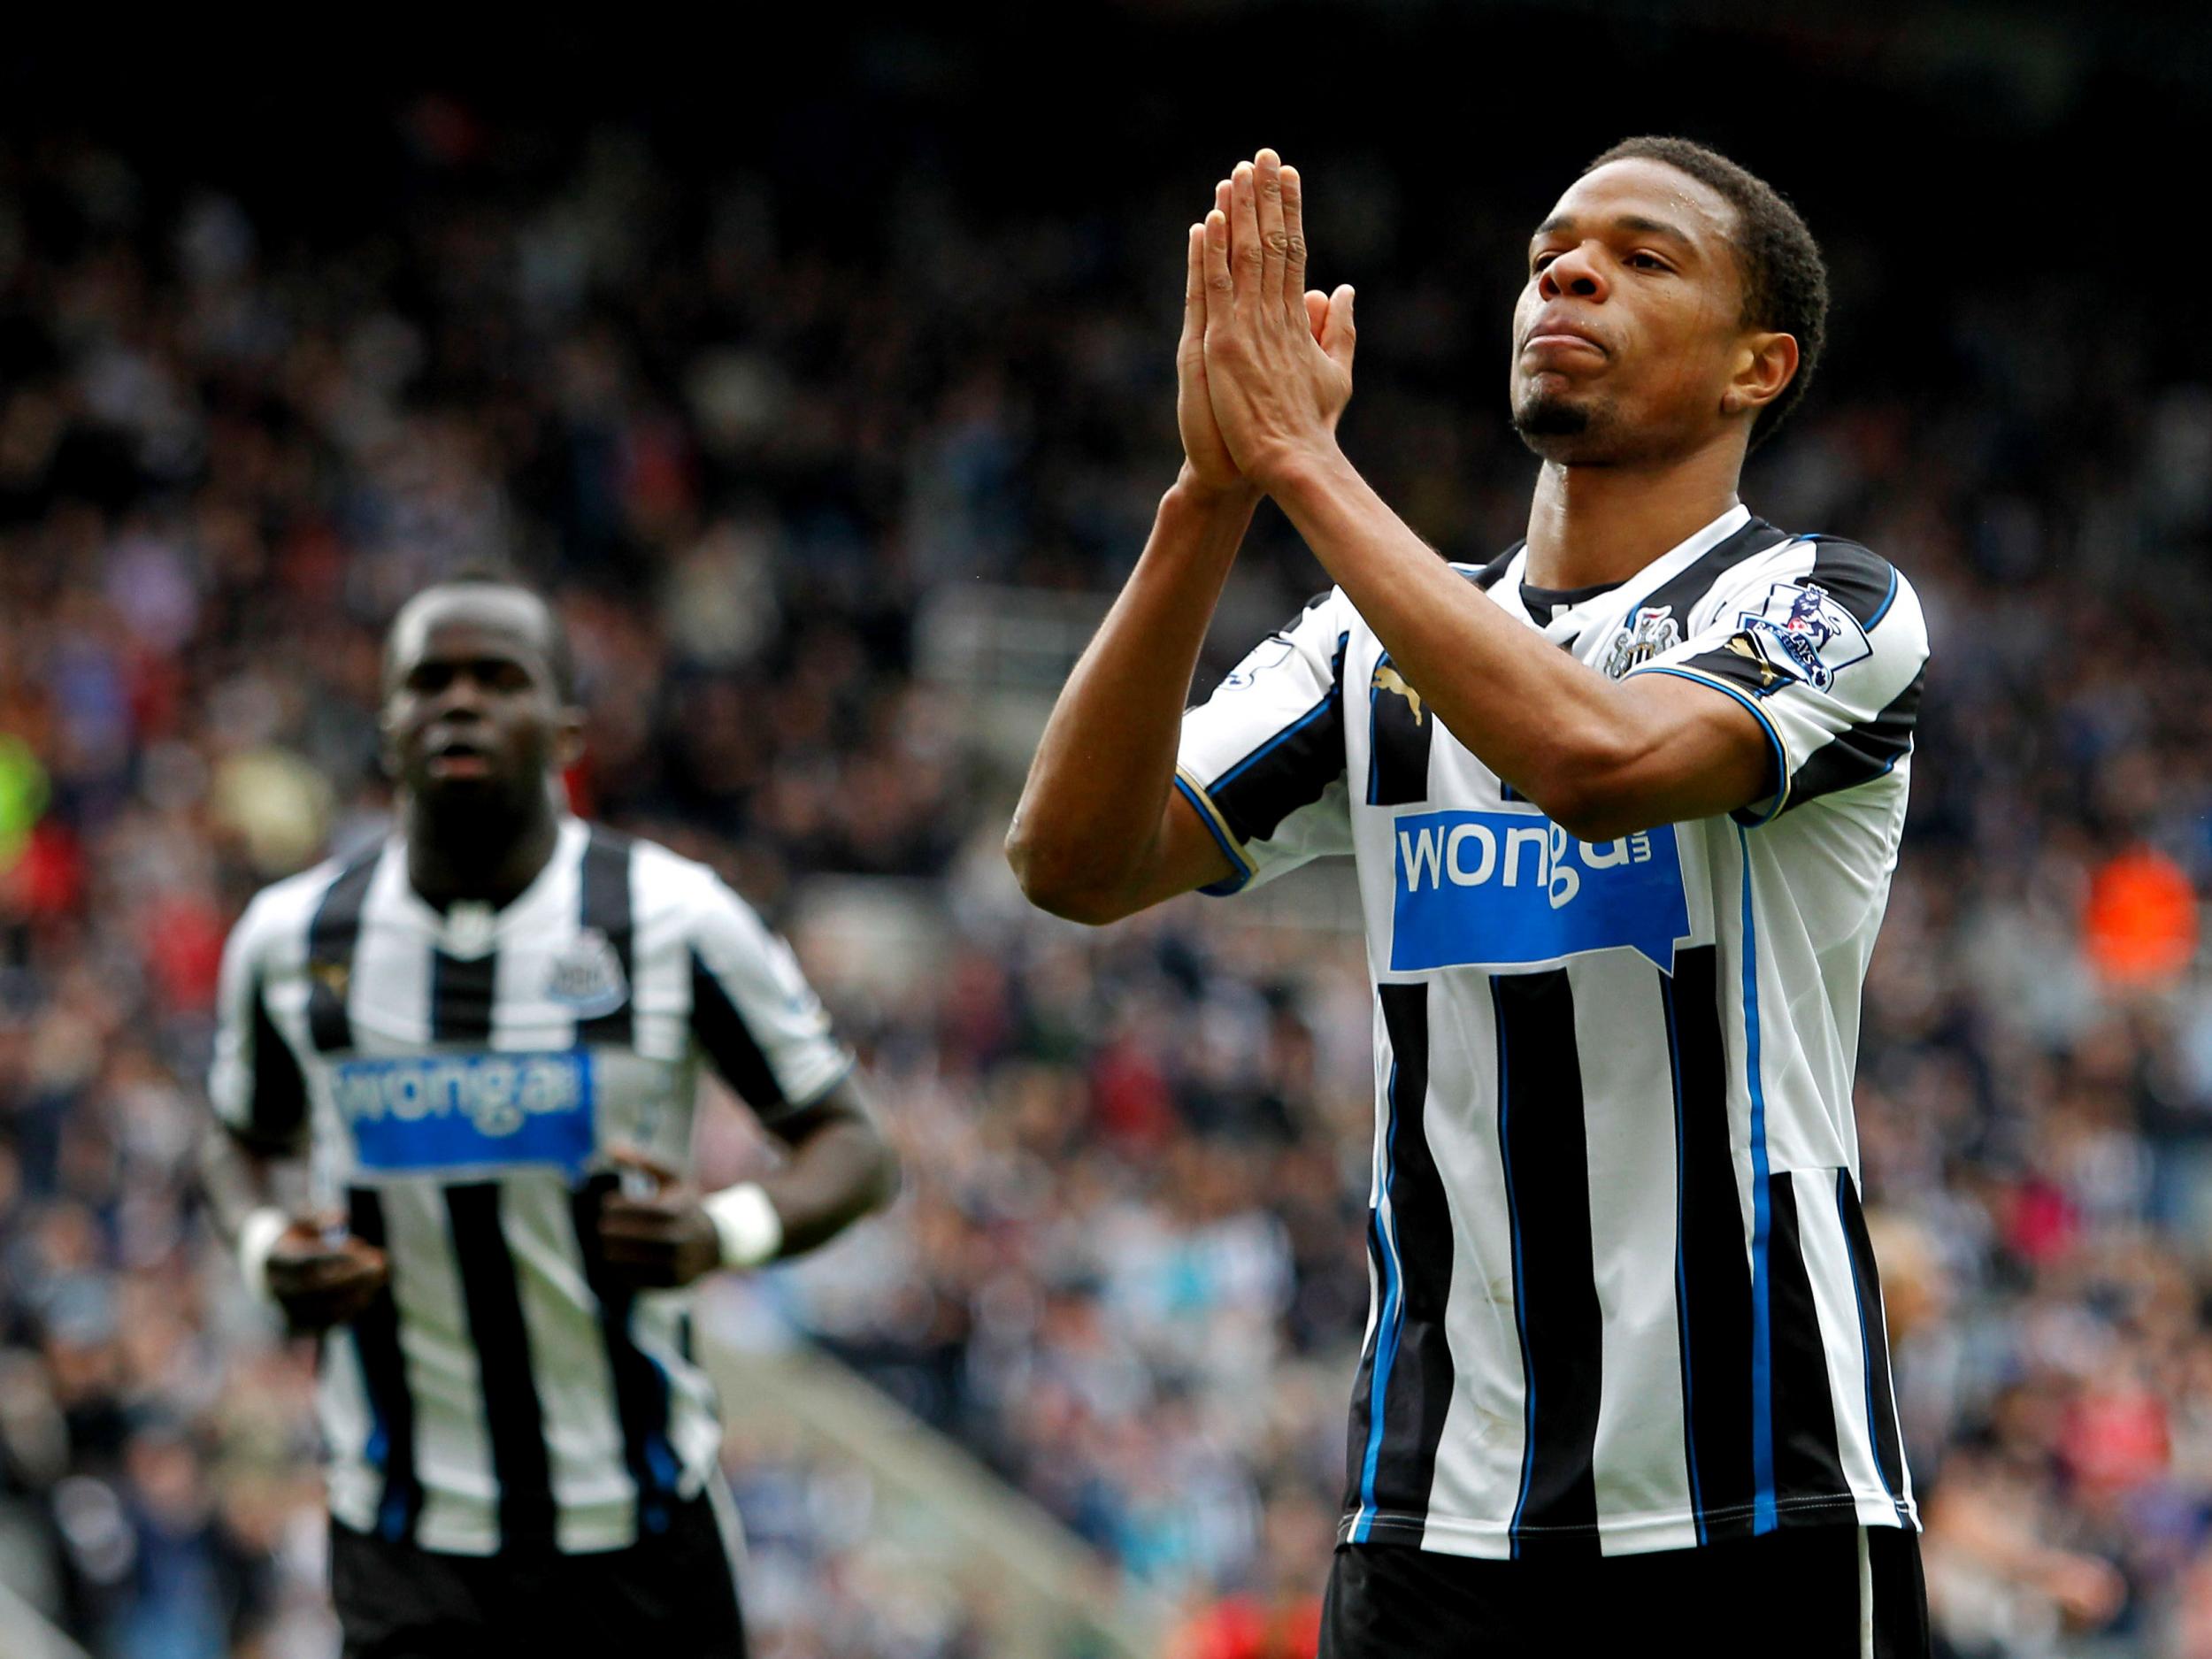 Loic Remy played on loan for Newcastle in 2013/14